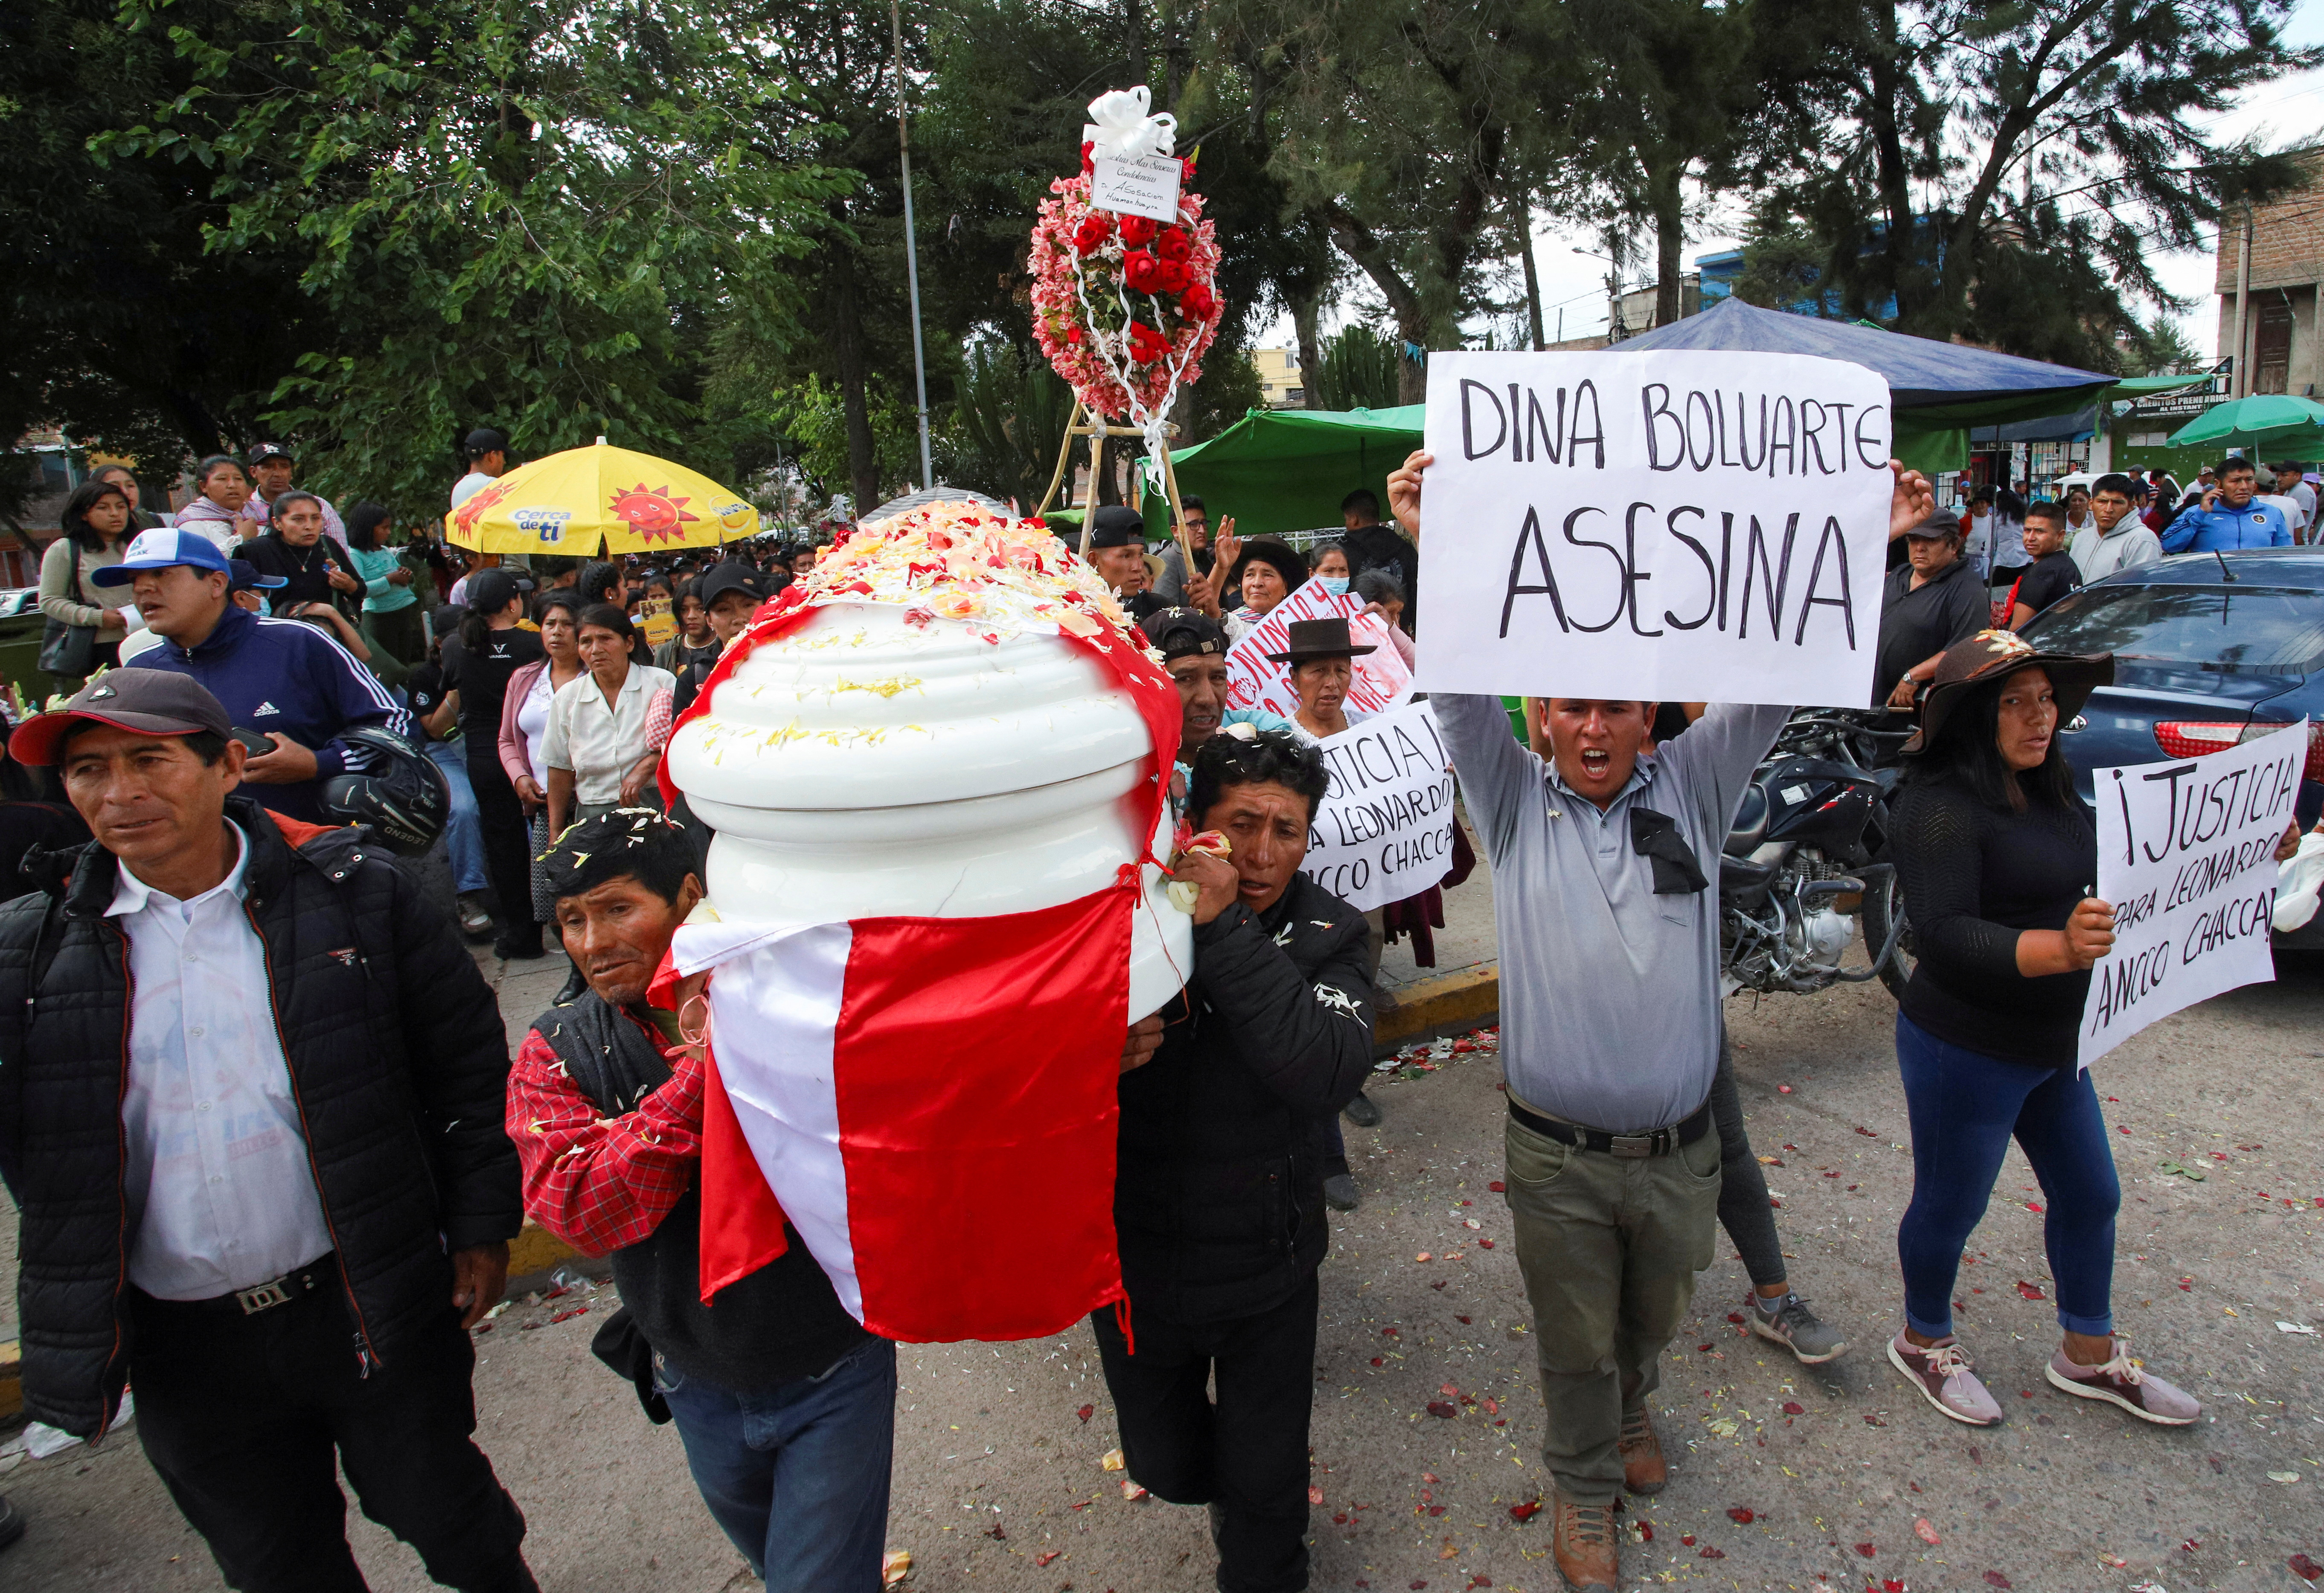 Caught in the crossfire, Peru protest deaths keep anger burning